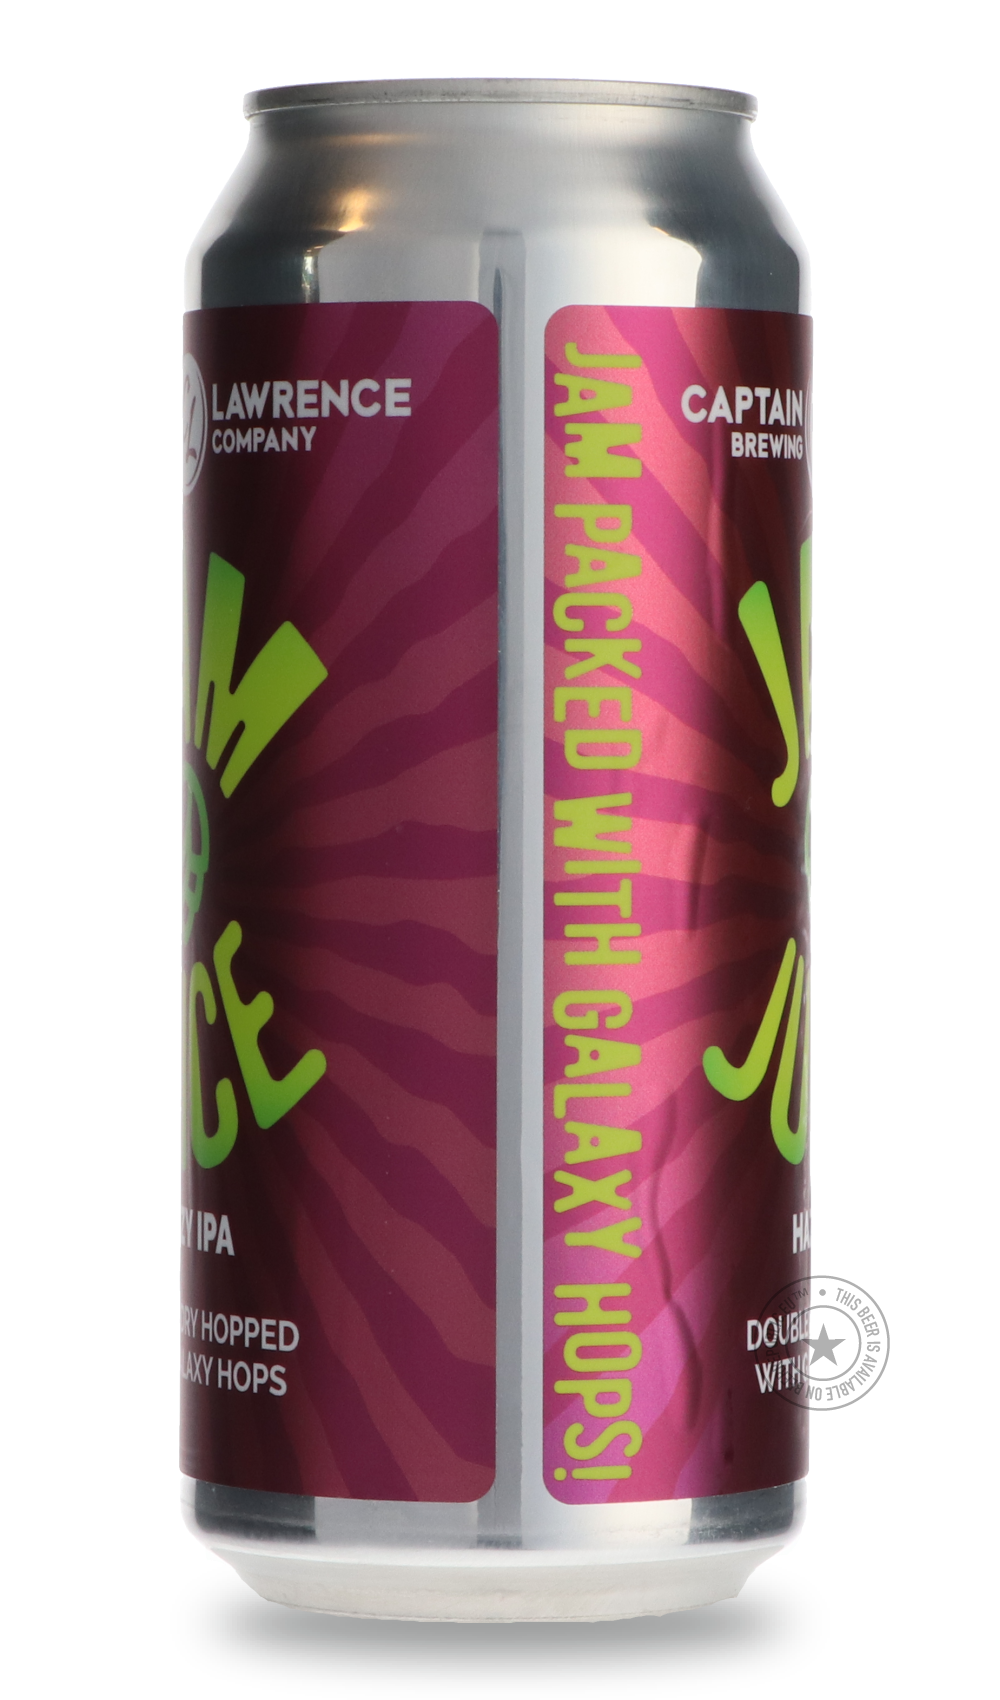 -Captain Lawrence- Jam Juice Hazy IPA-IPA- Only @ Beer Republic - The best online beer store for American & Canadian craft beer - Buy beer online from the USA and Canada - Bier online kopen - Amerikaans bier kopen - Craft beer store - Craft beer kopen - Amerikanisch bier kaufen - Bier online kaufen - Acheter biere online - IPA - Stout - Porter - New England IPA - Hazy IPA - Imperial Stout - Barrel Aged - Barrel Aged Imperial Stout - Brown - Dark beer - Blond - Blonde - Pilsner - Lager - Wheat - Weizen - Amb